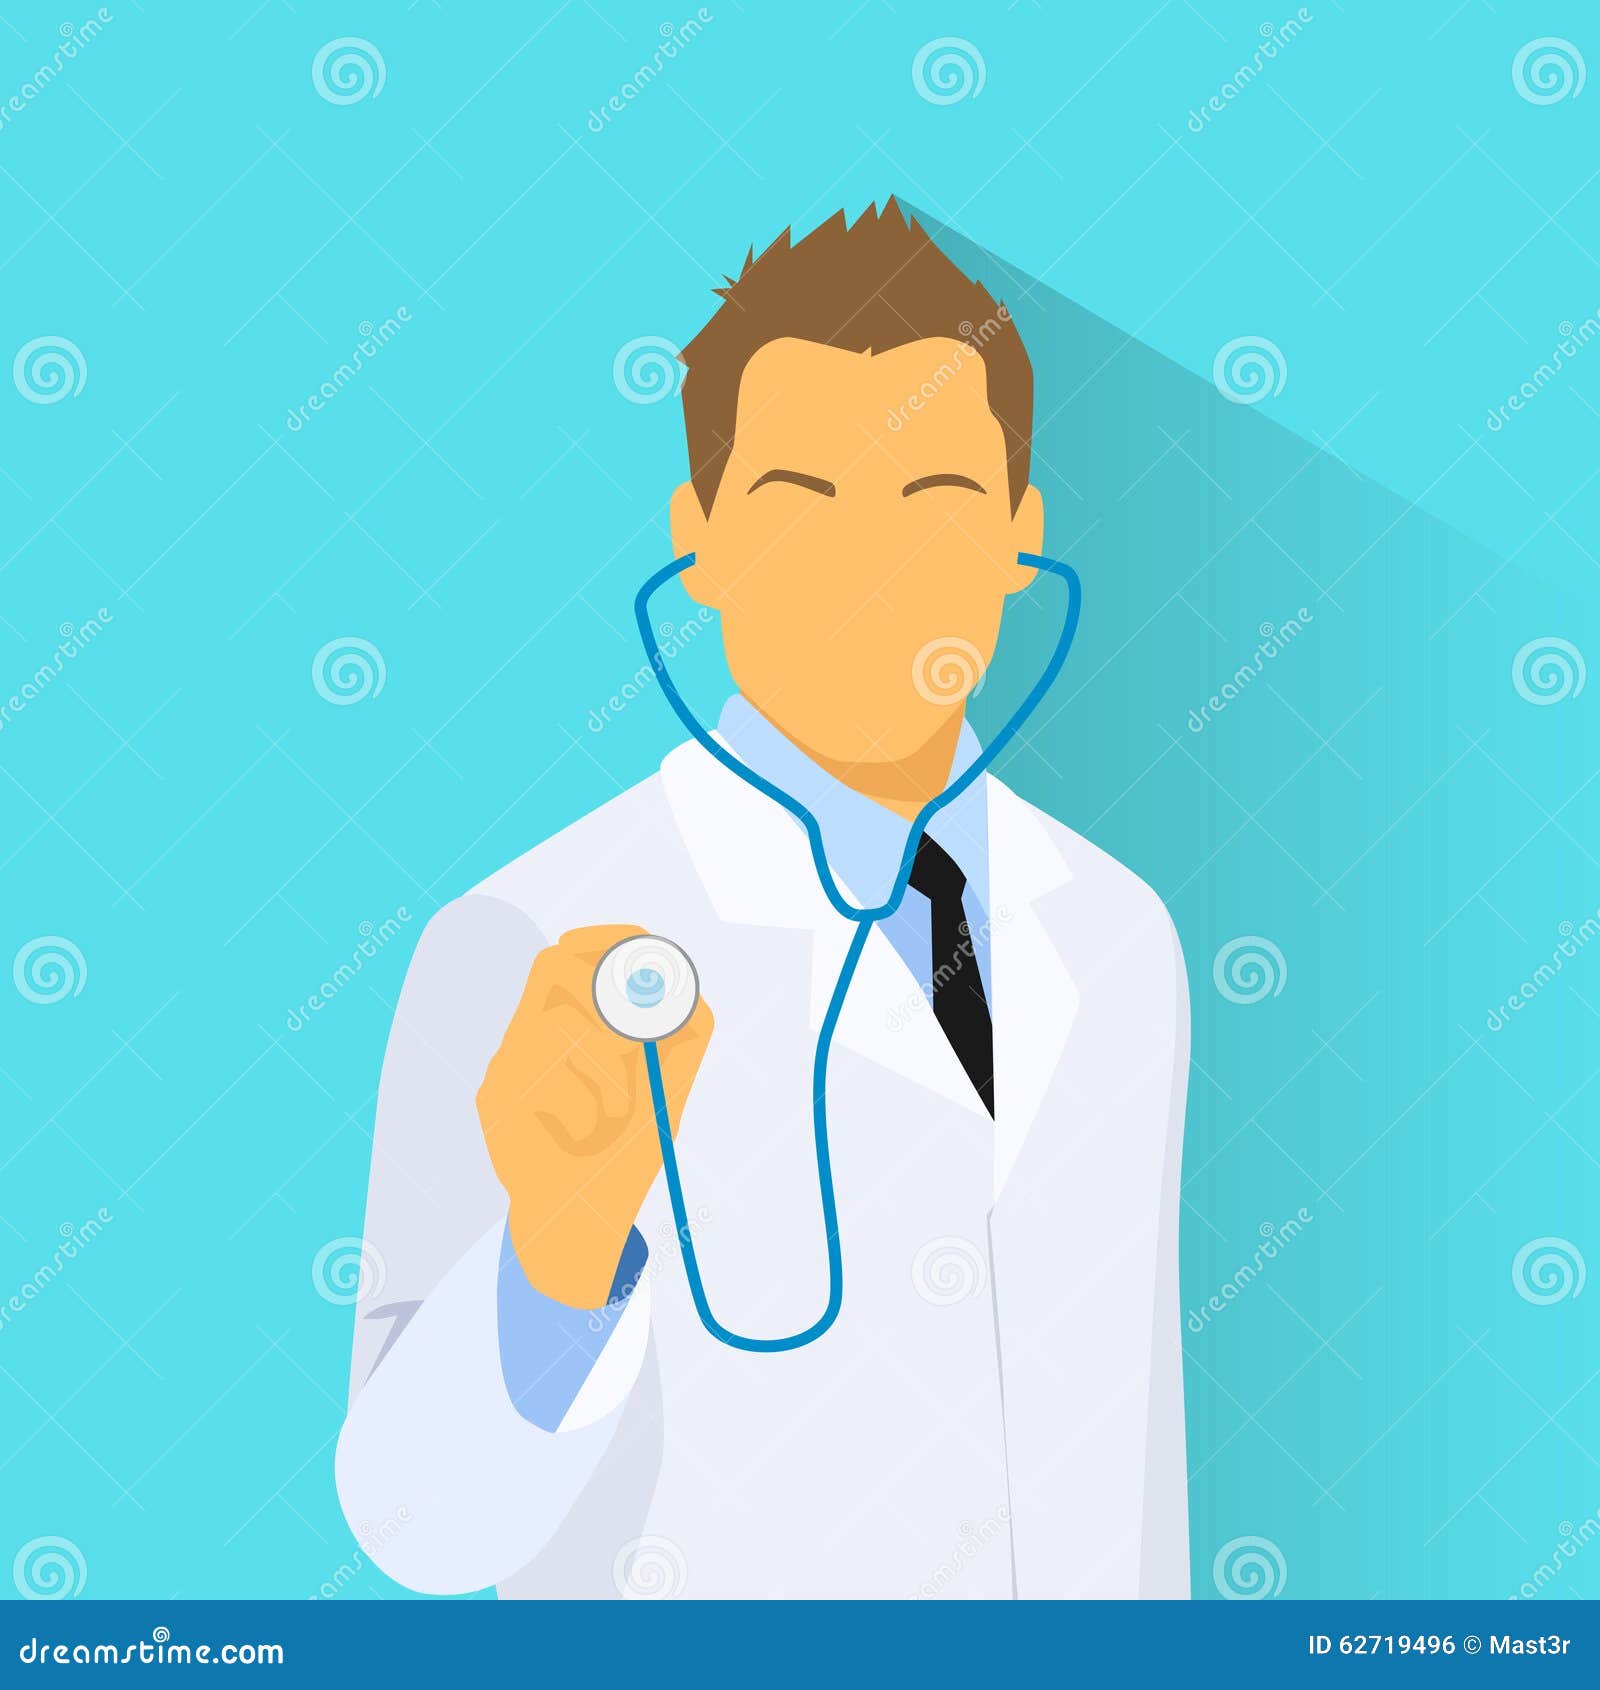 Medical Doctor With Stethoscope Profile Icon Male Stock Vector